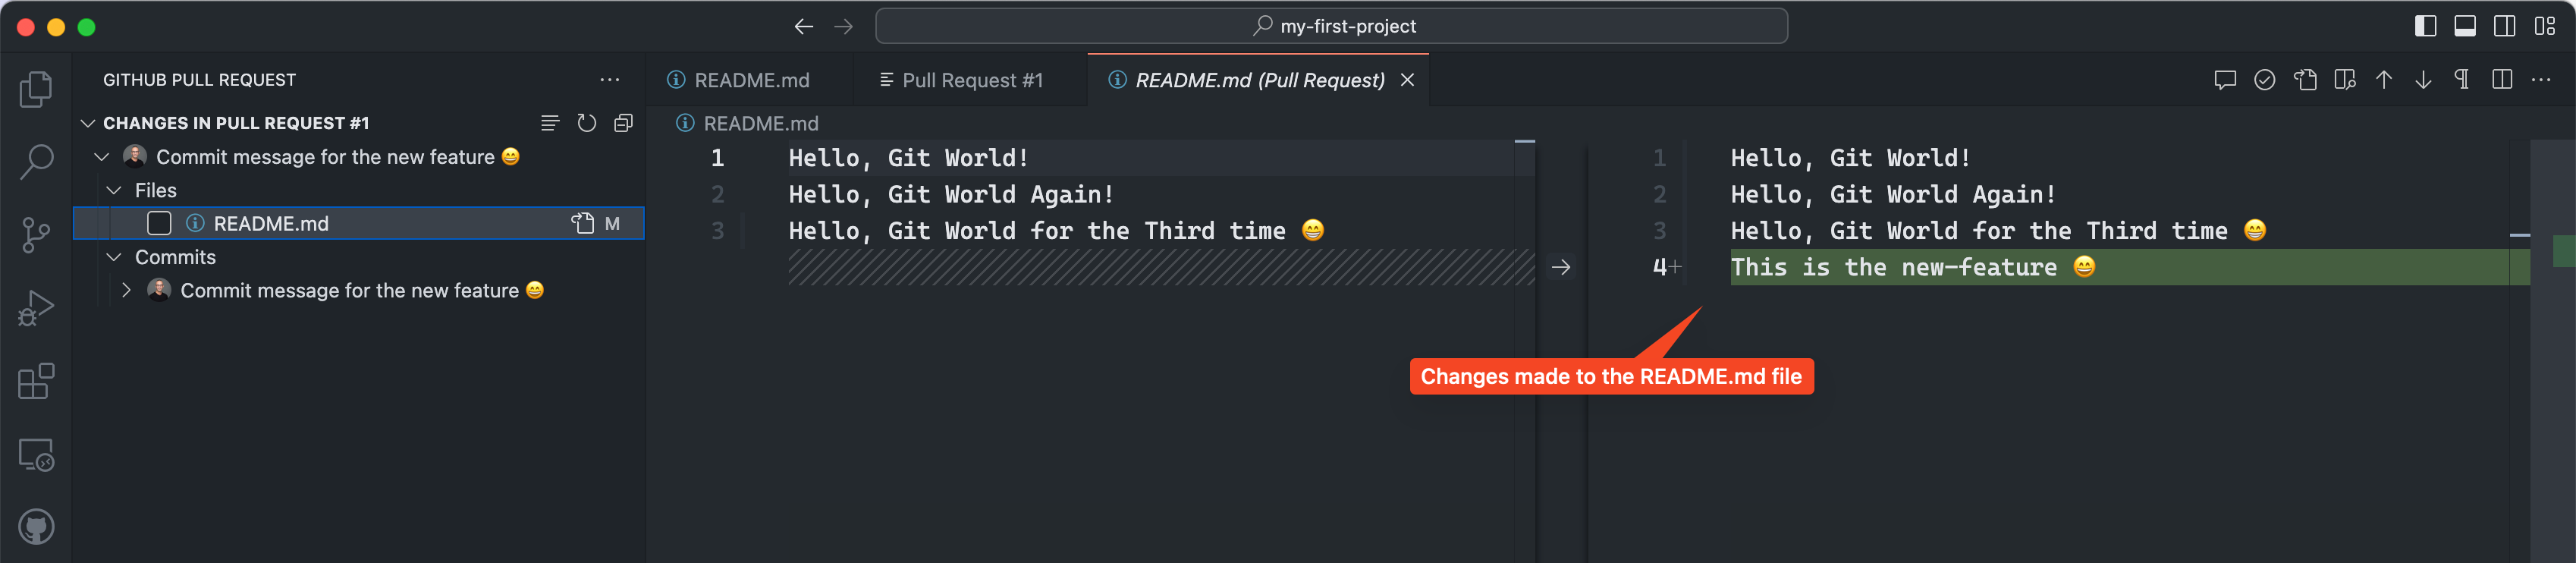 Changes Made to Readme File